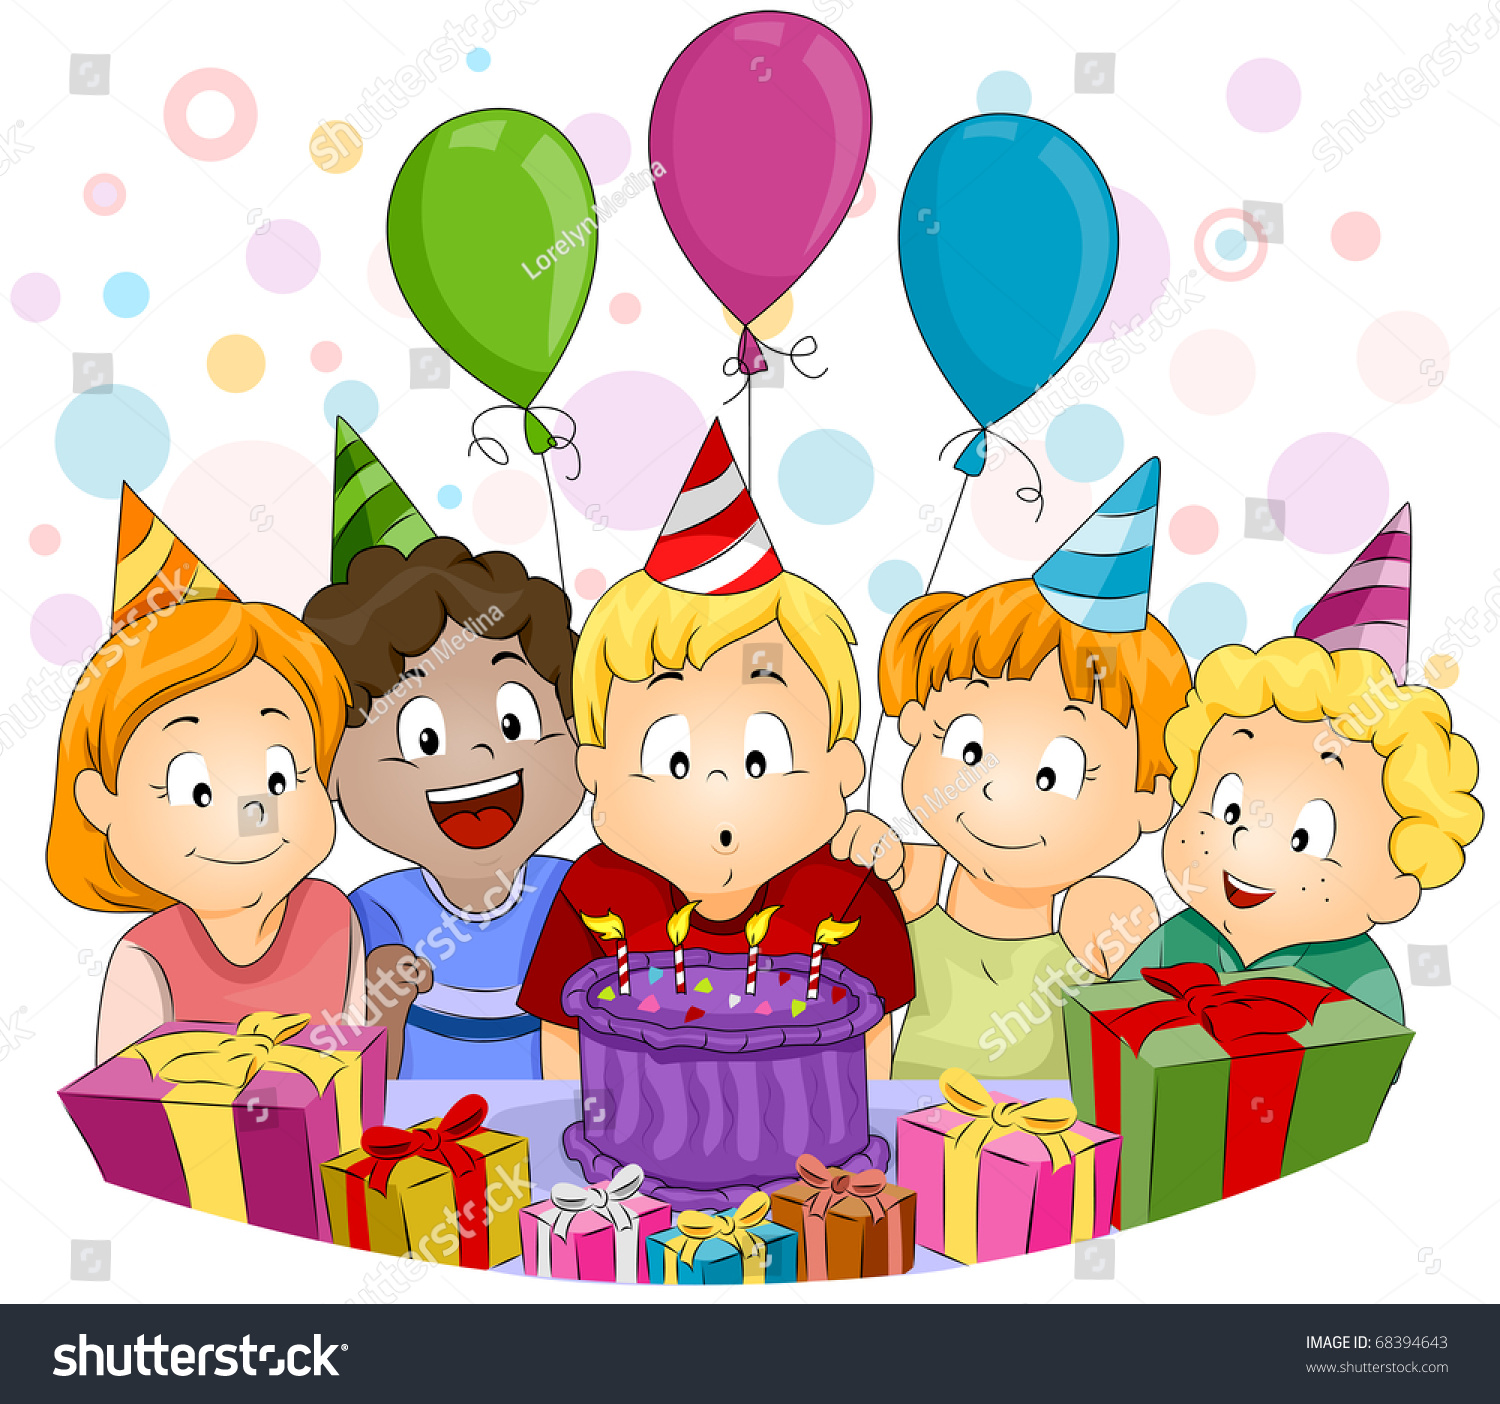 Illustration Of A Kid Blowing His Birthday Candles - 68394643 ...